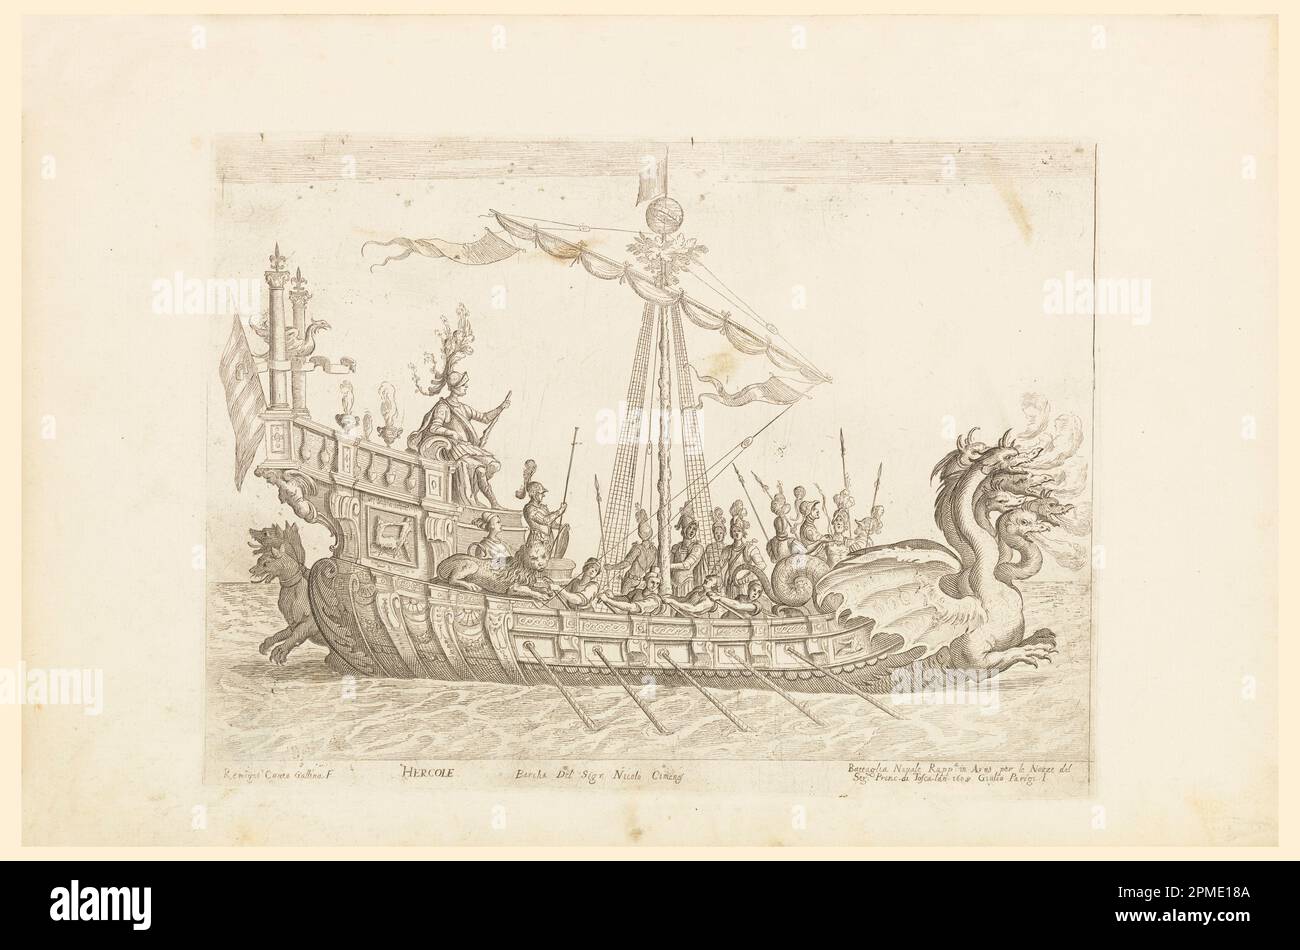 Print, From a Series of Naval Battles for Wedding Festivities of Cosimo Il de'Medici, Ship of Heracles; Etched by Remigio Cantagallina (Italian, ca. 1582–1656); After Giulio Parigi (Italian, 1571–1635); Patron: Cosimo II de' Medici (Italian, 1590 – 1621); Italy; black ink on white paper; 26.9 x 40.6 cm (10 9/16 in. x 16 in.) Platemark: 20.8 x 28.3 cm (8 3/16 x 11 1/8 in.) Stock Photo